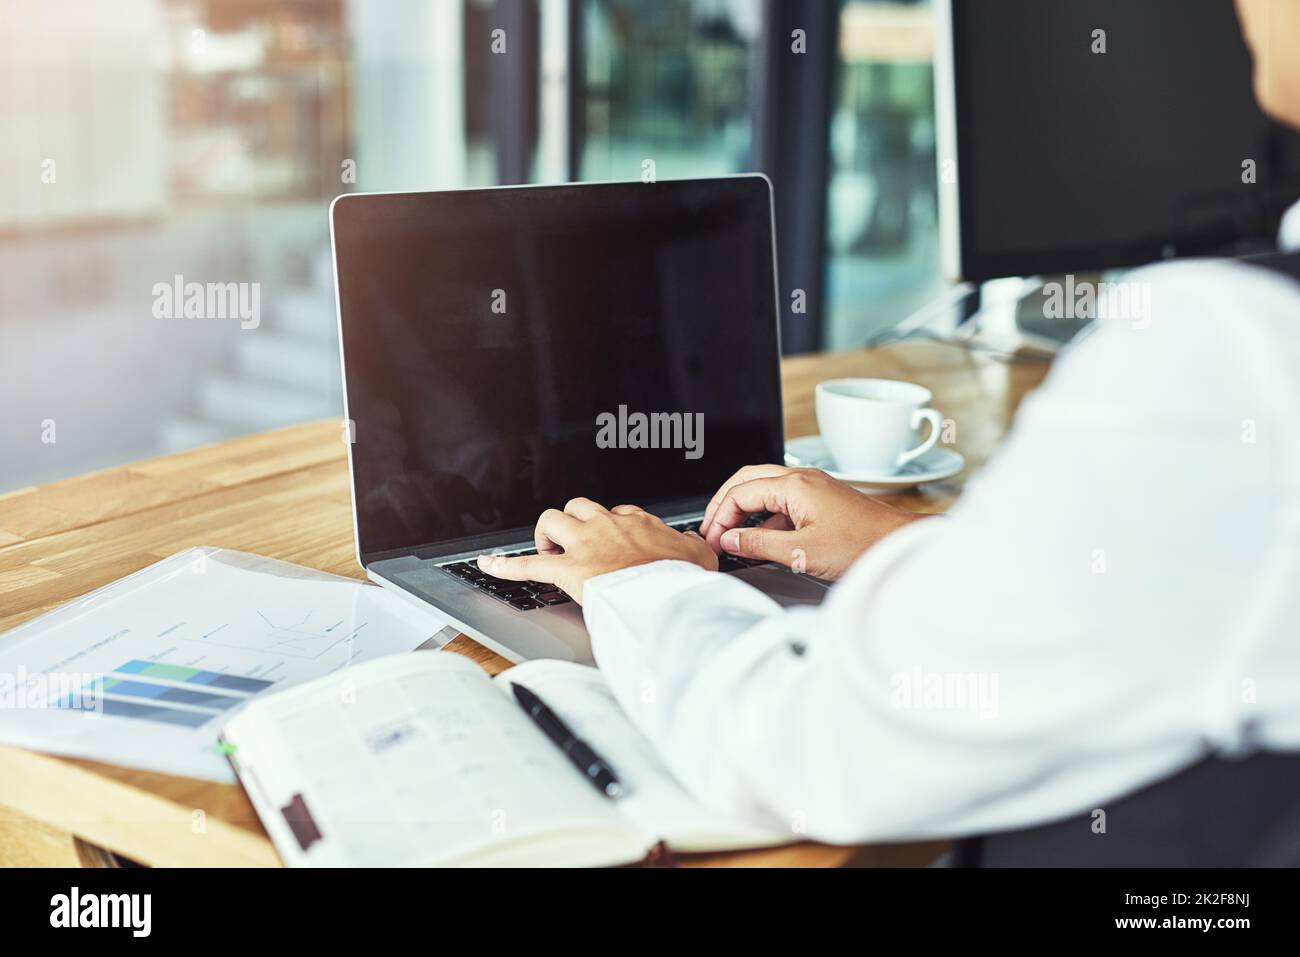 Time to do business. Closeup shot of a businesswoman working on a laptop in a modern office. Stock Photo